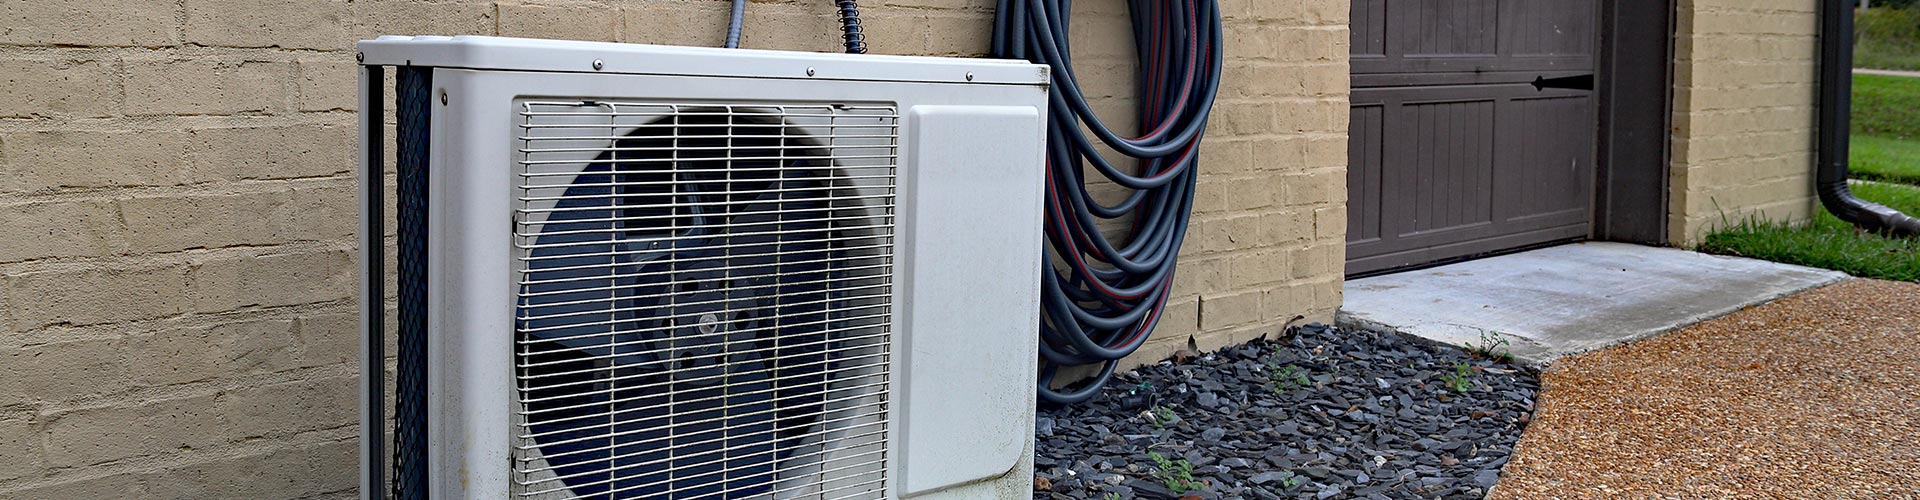 Installed ductless or mini split outside of the home.